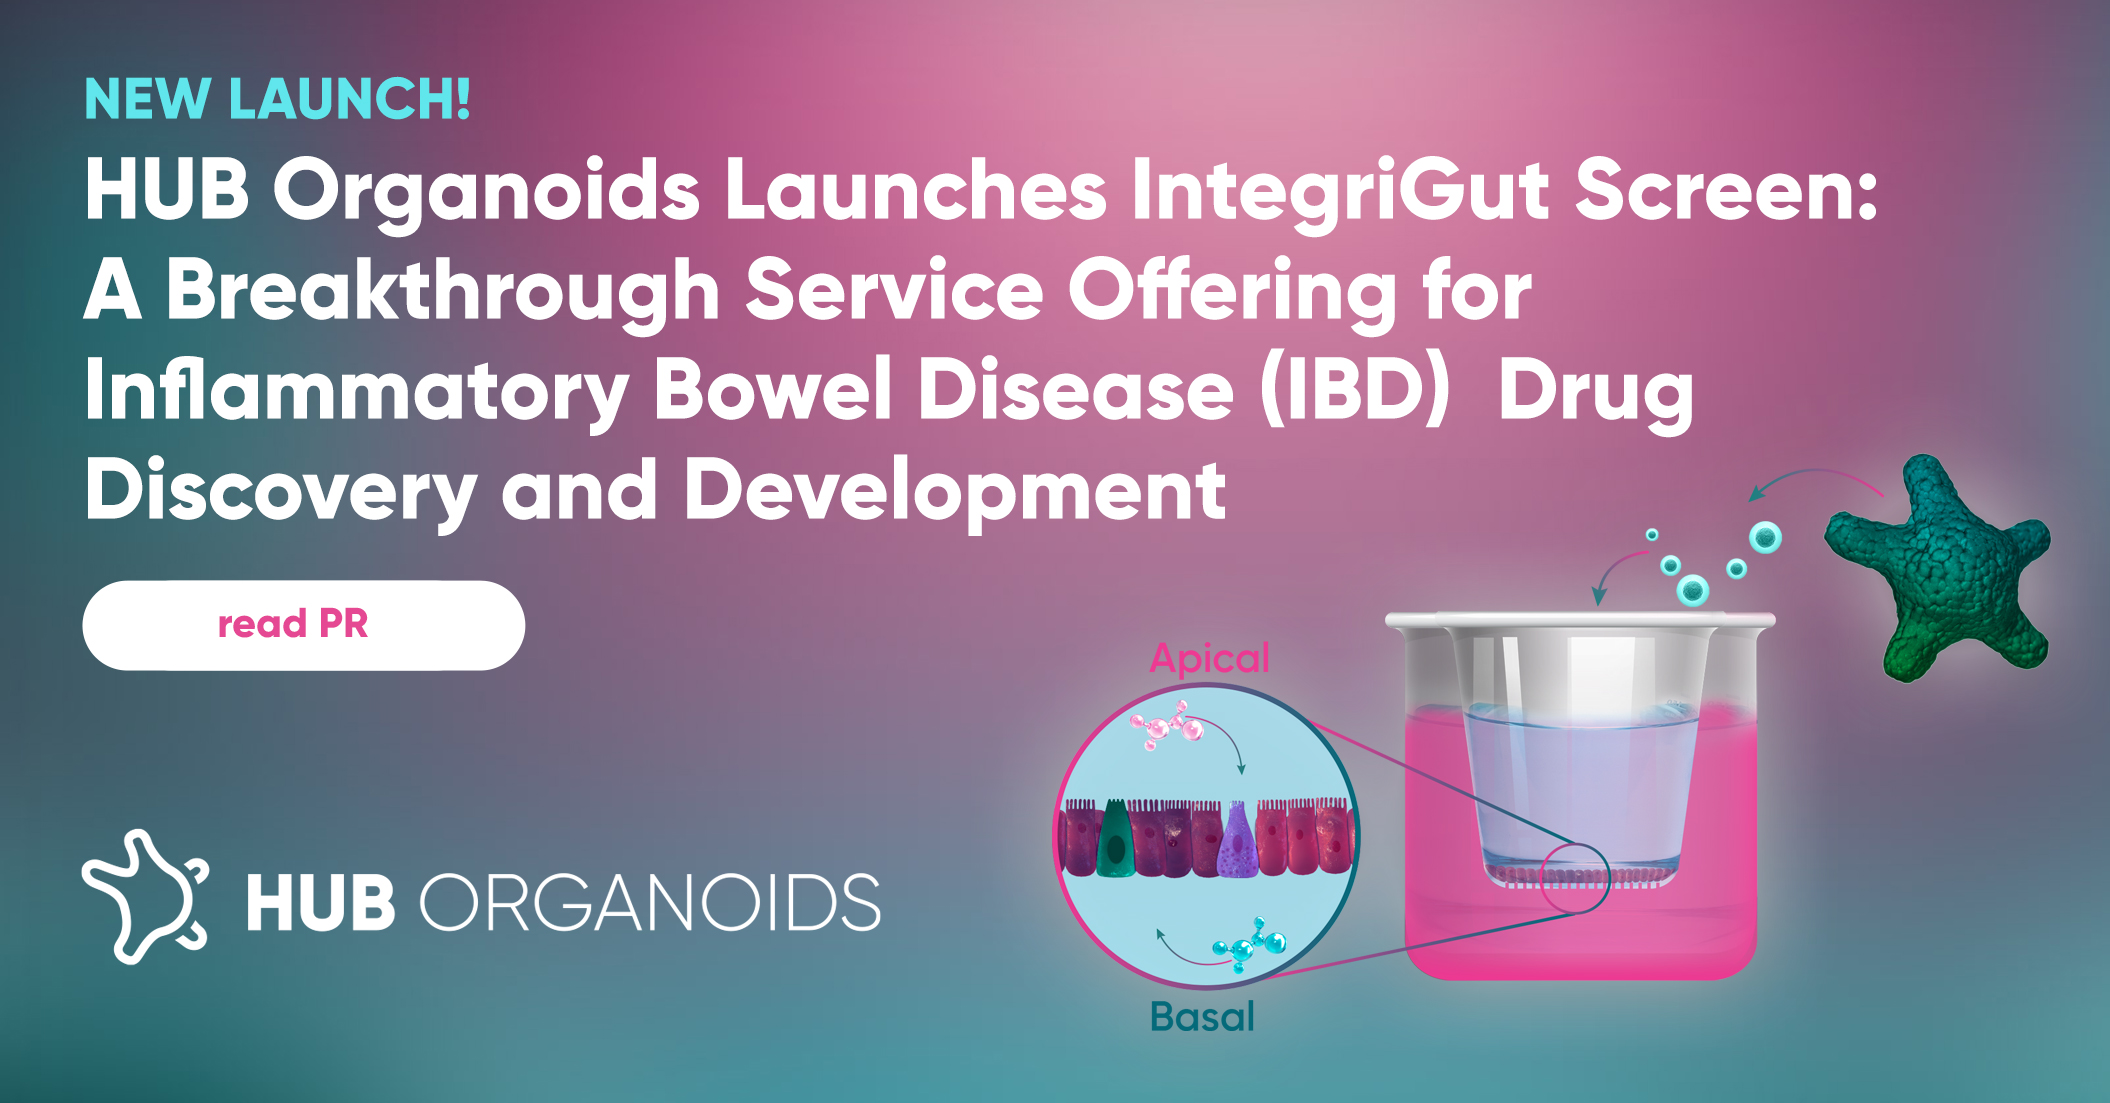 HUB Organoids Launches IntegriGut Screen: A Breakthrough Service Offering for Inflammatory Bowel Disease (IBD)  Drug Discovery and Development